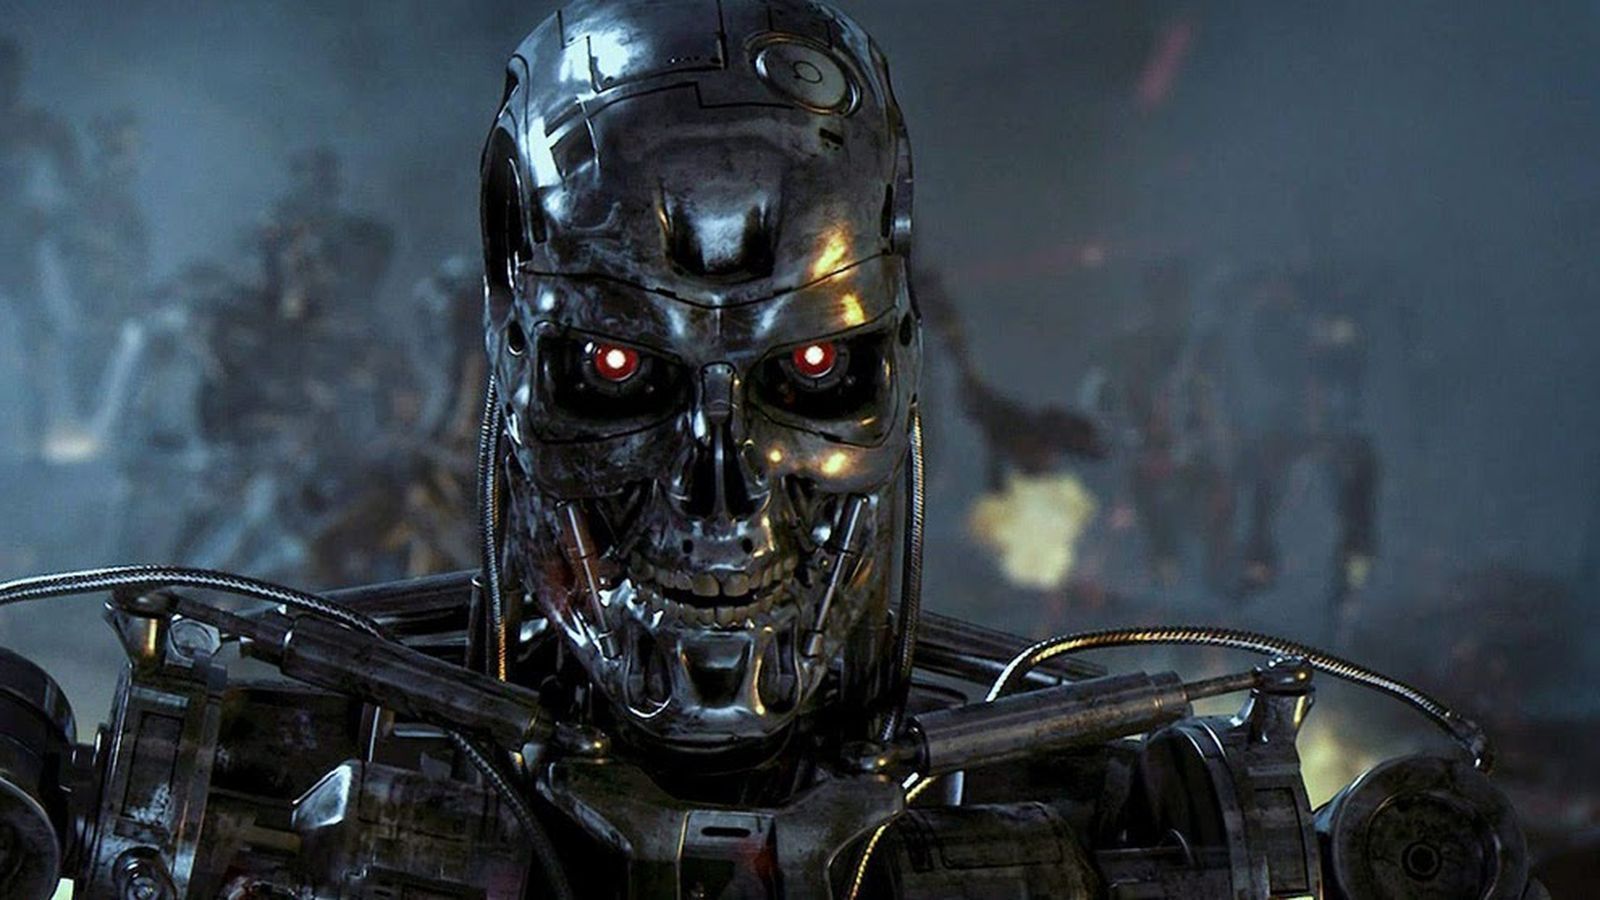 Terminator Genisys: How Impressive Special Effects Saved a Doomed